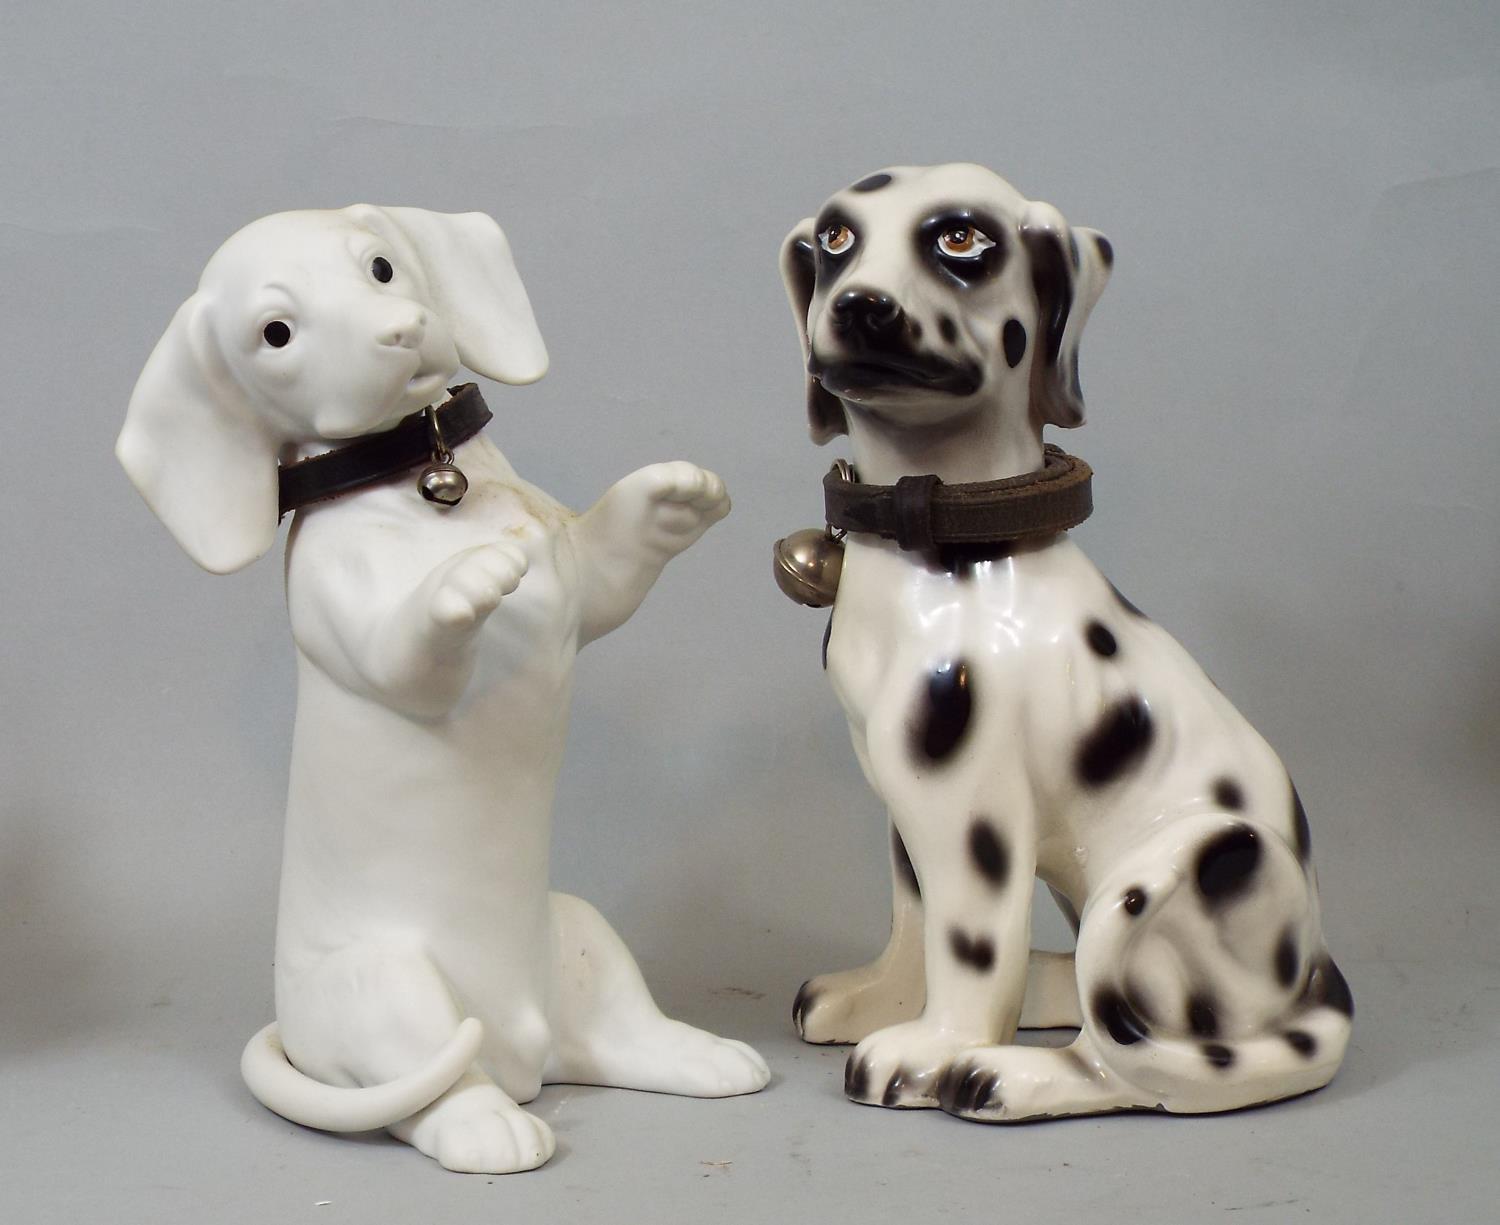 Six ceramic figures of dogs, Poodle, Dachshund, Boxer, etc, 30 cm and smaller - Image 2 of 4